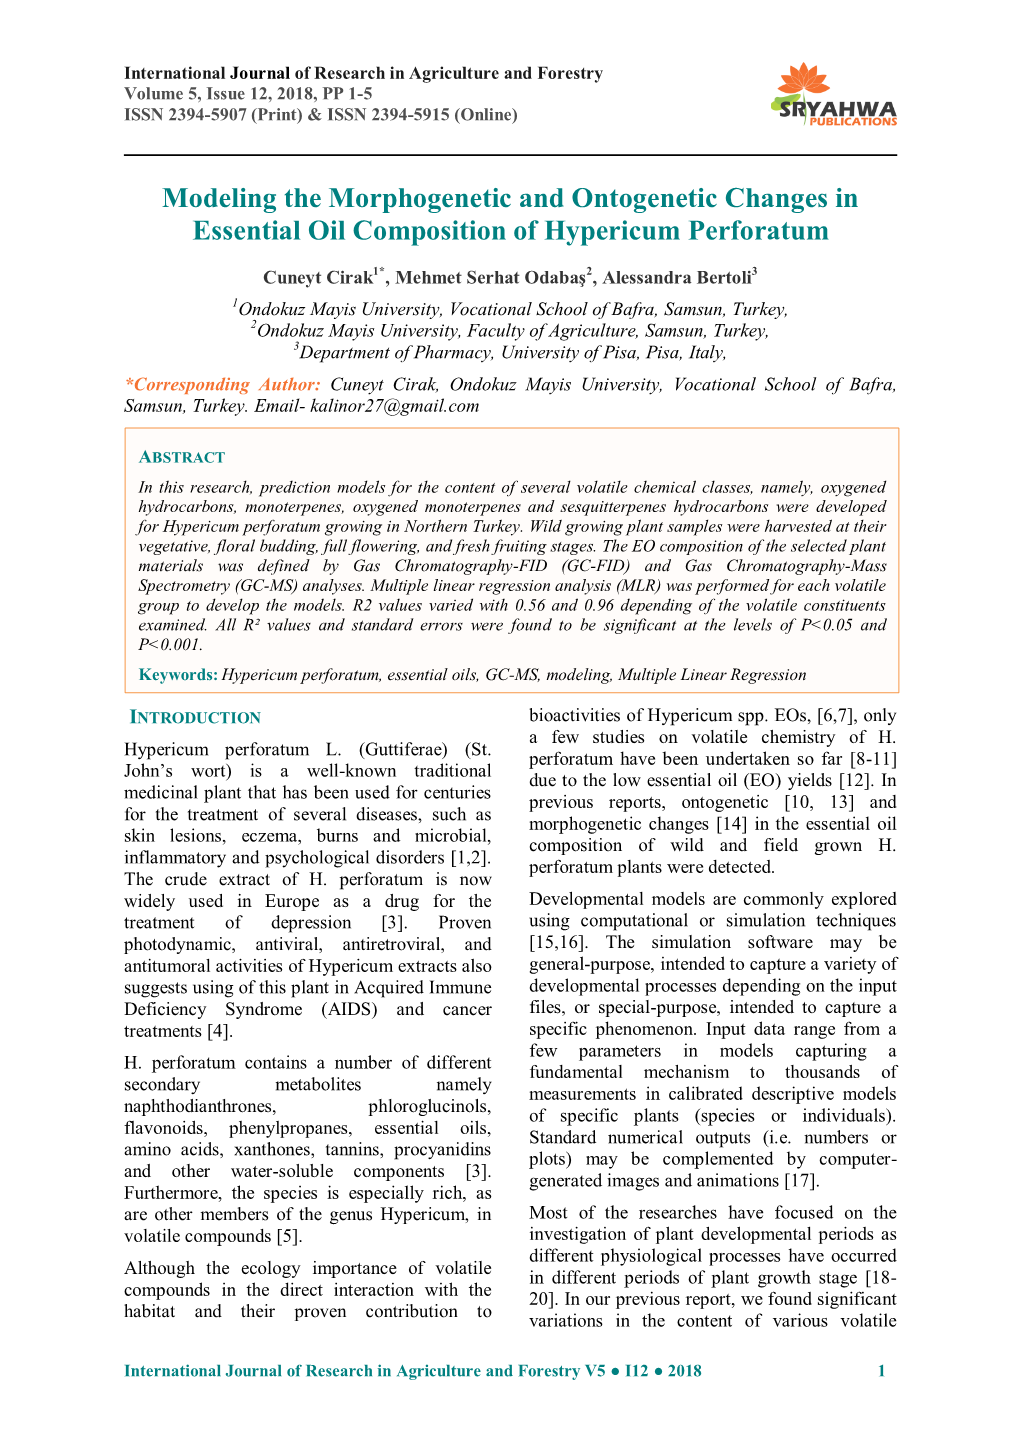 Modeling the Morphogenetic and Ontogenetic Changes in Essential Oil Composition of Hypericum Perforatum